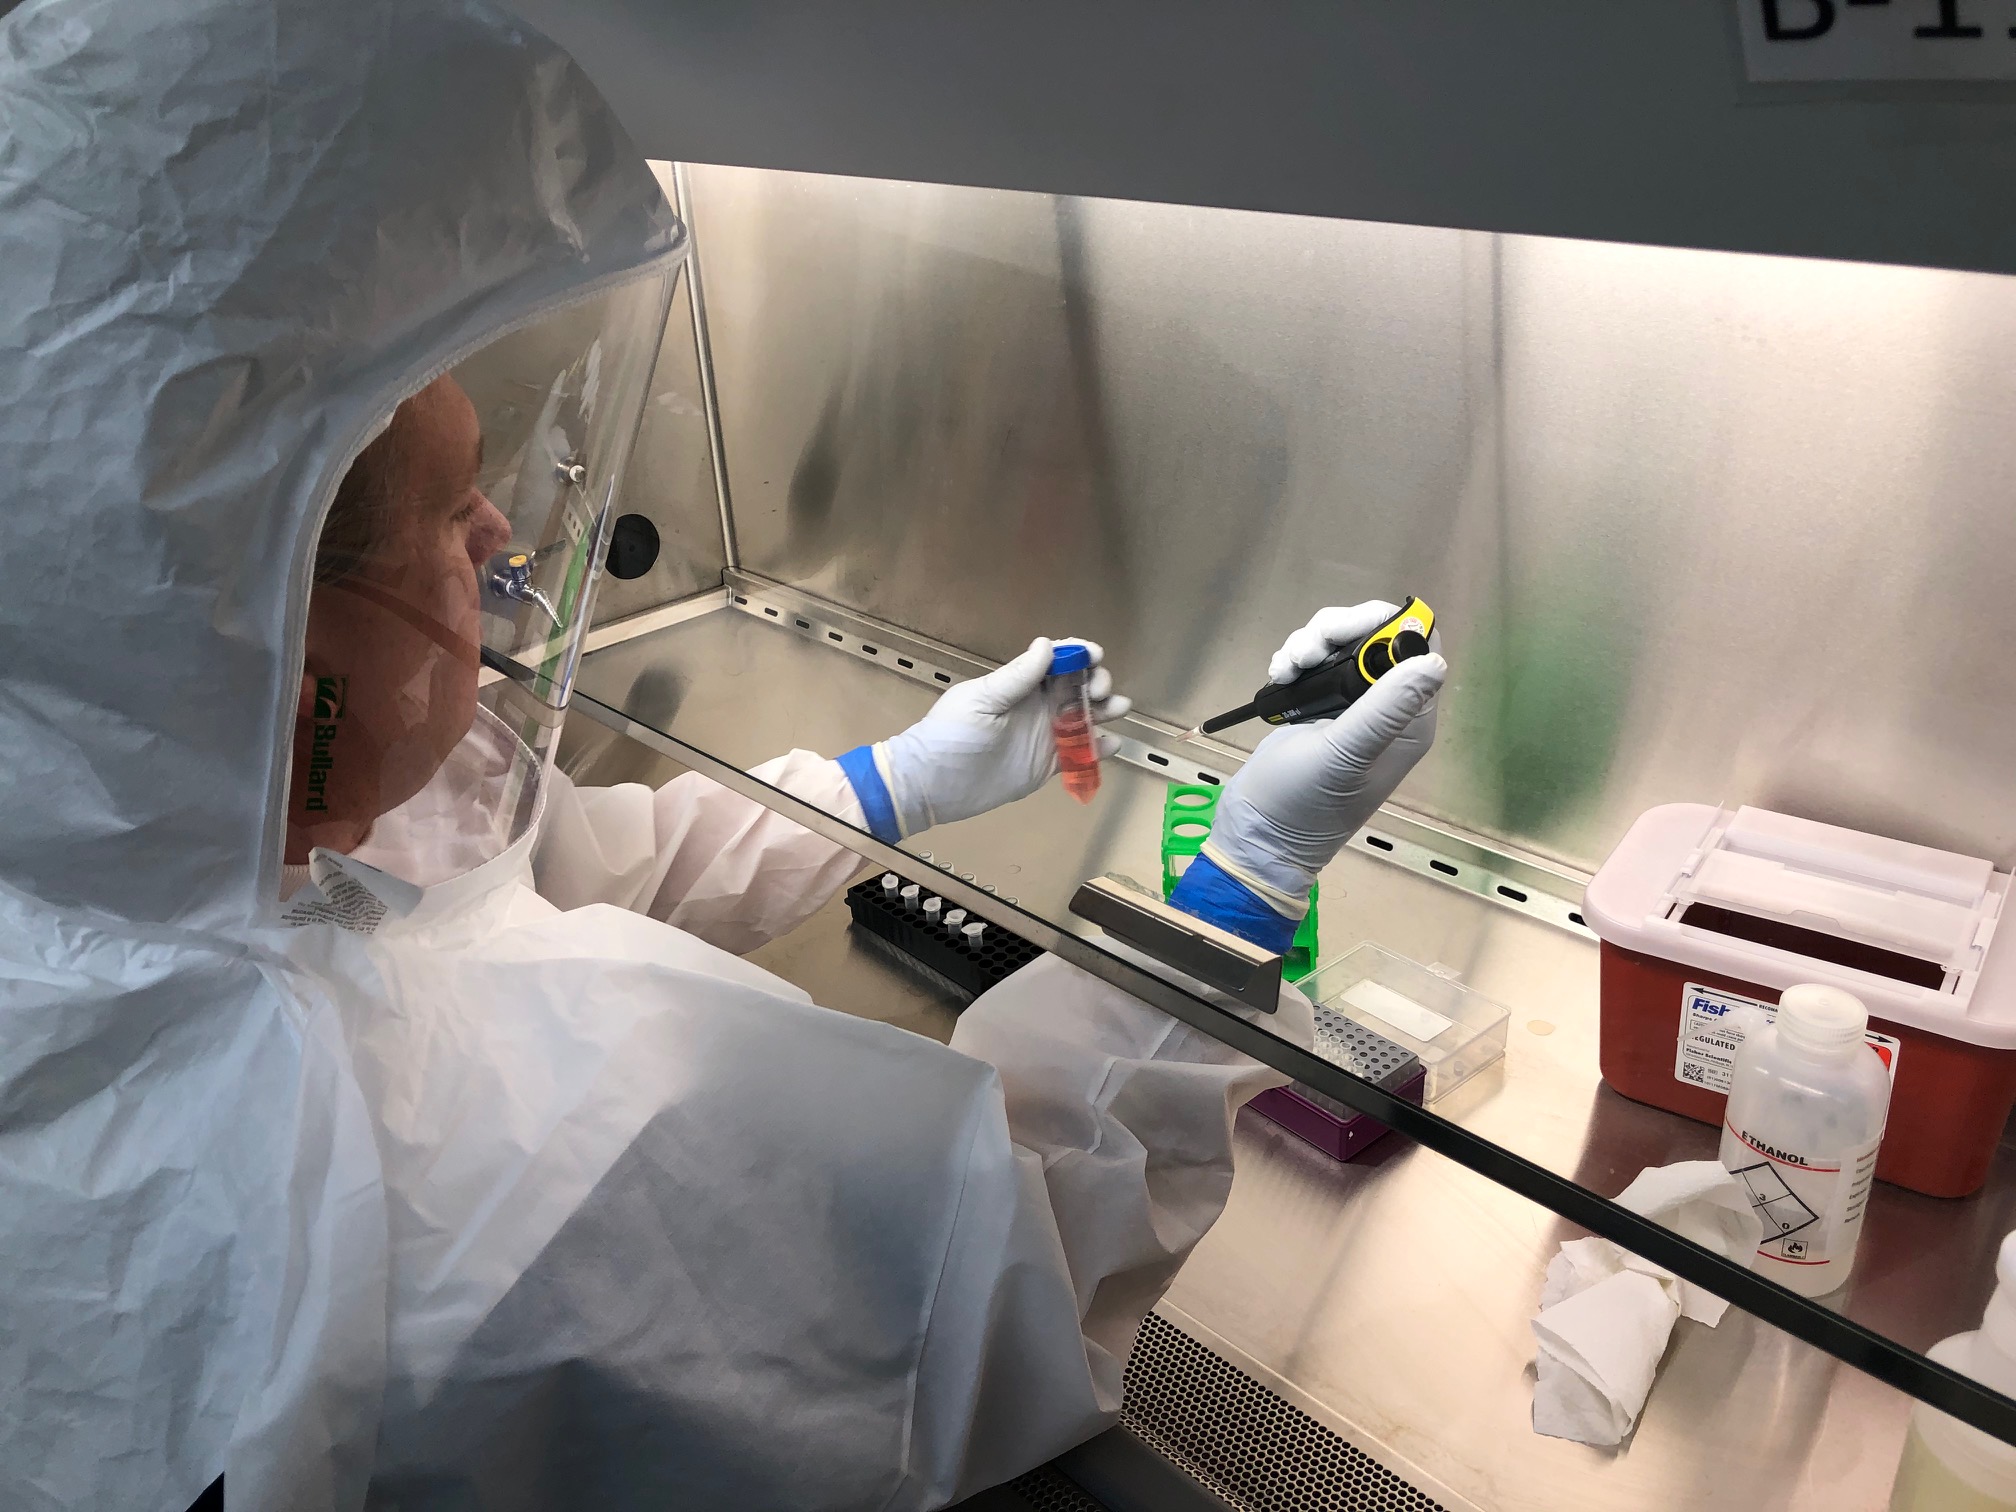 Infectious disease researchers at UofL are working with all 10 Louisville hospitals and two in southern Indiana to process tests and study the illness in order to gather information needed to prevent transmission of COVID-19.